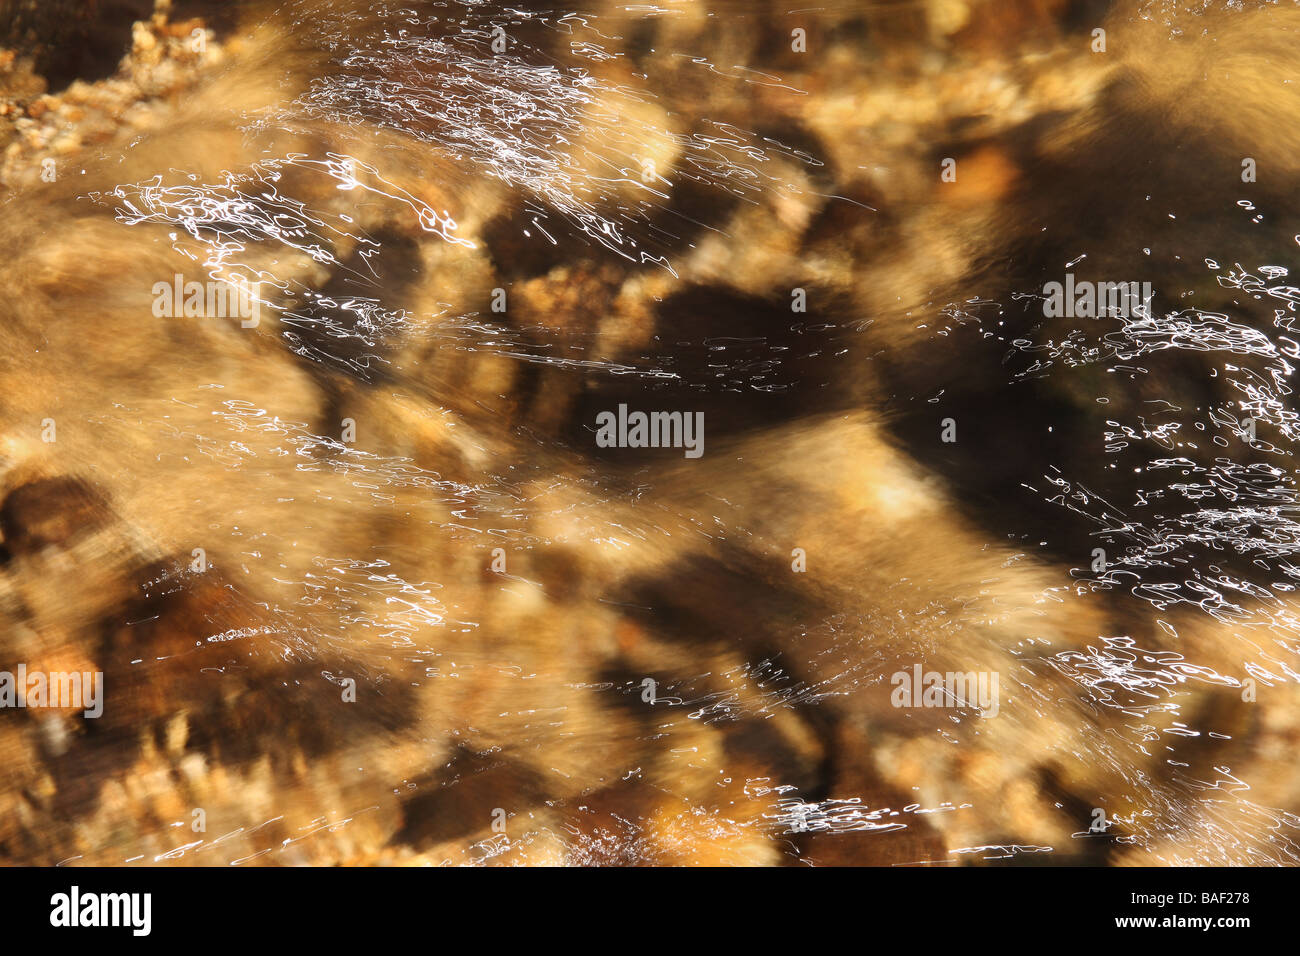 A close up of a section of a woodland stream with a stony bottom Light streaks in the water and plenty of movement blur Stock Photo